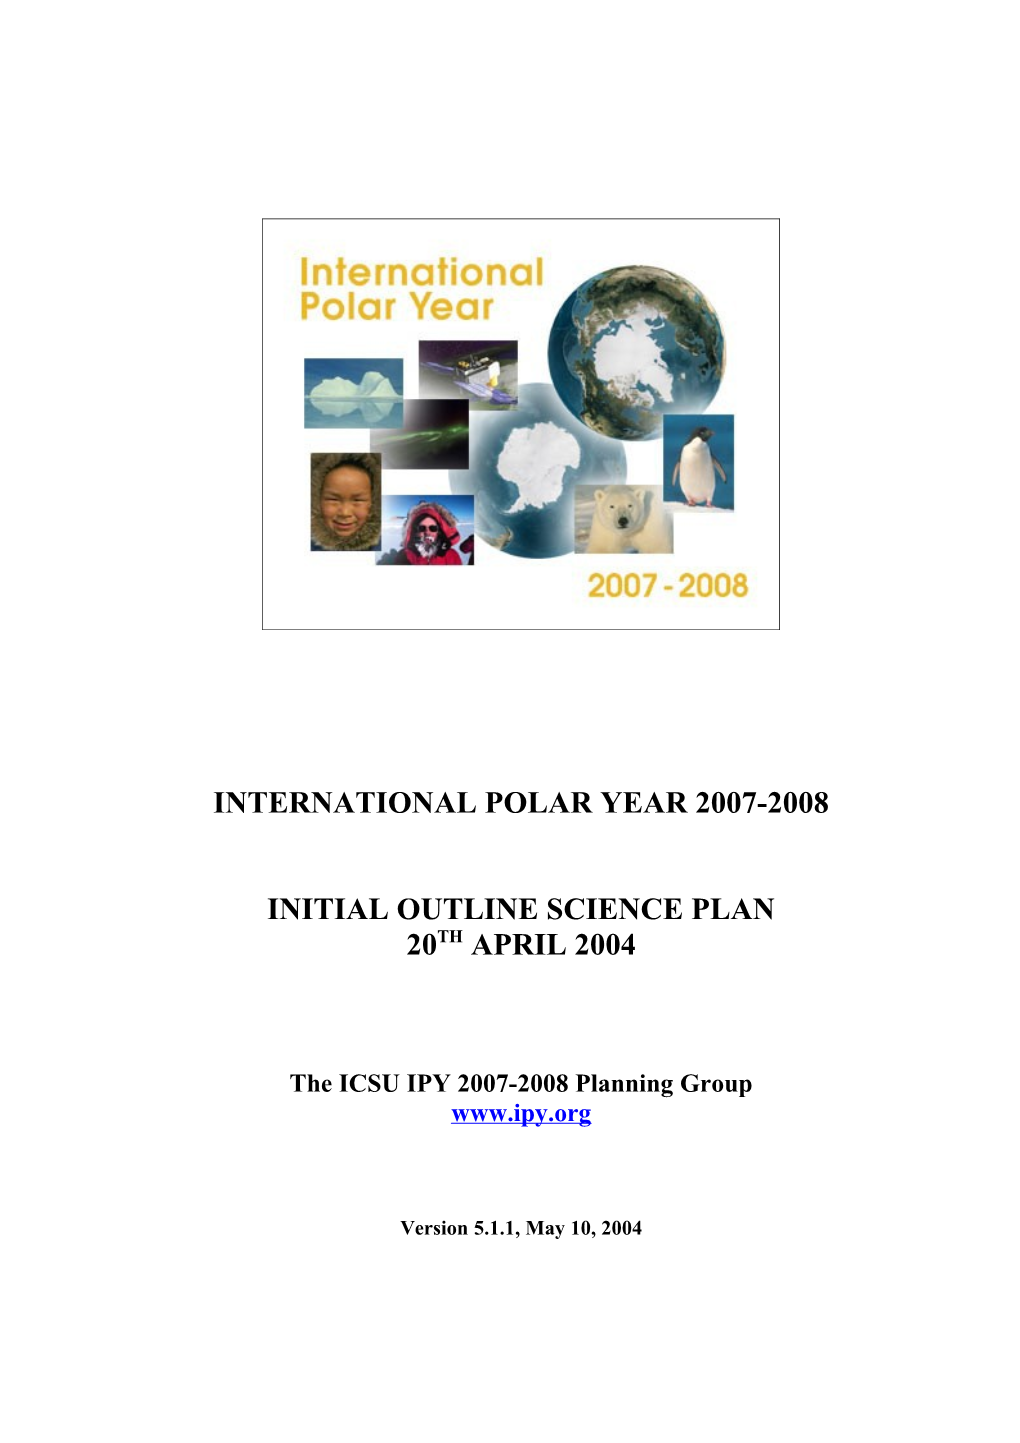 Outline Science Plan